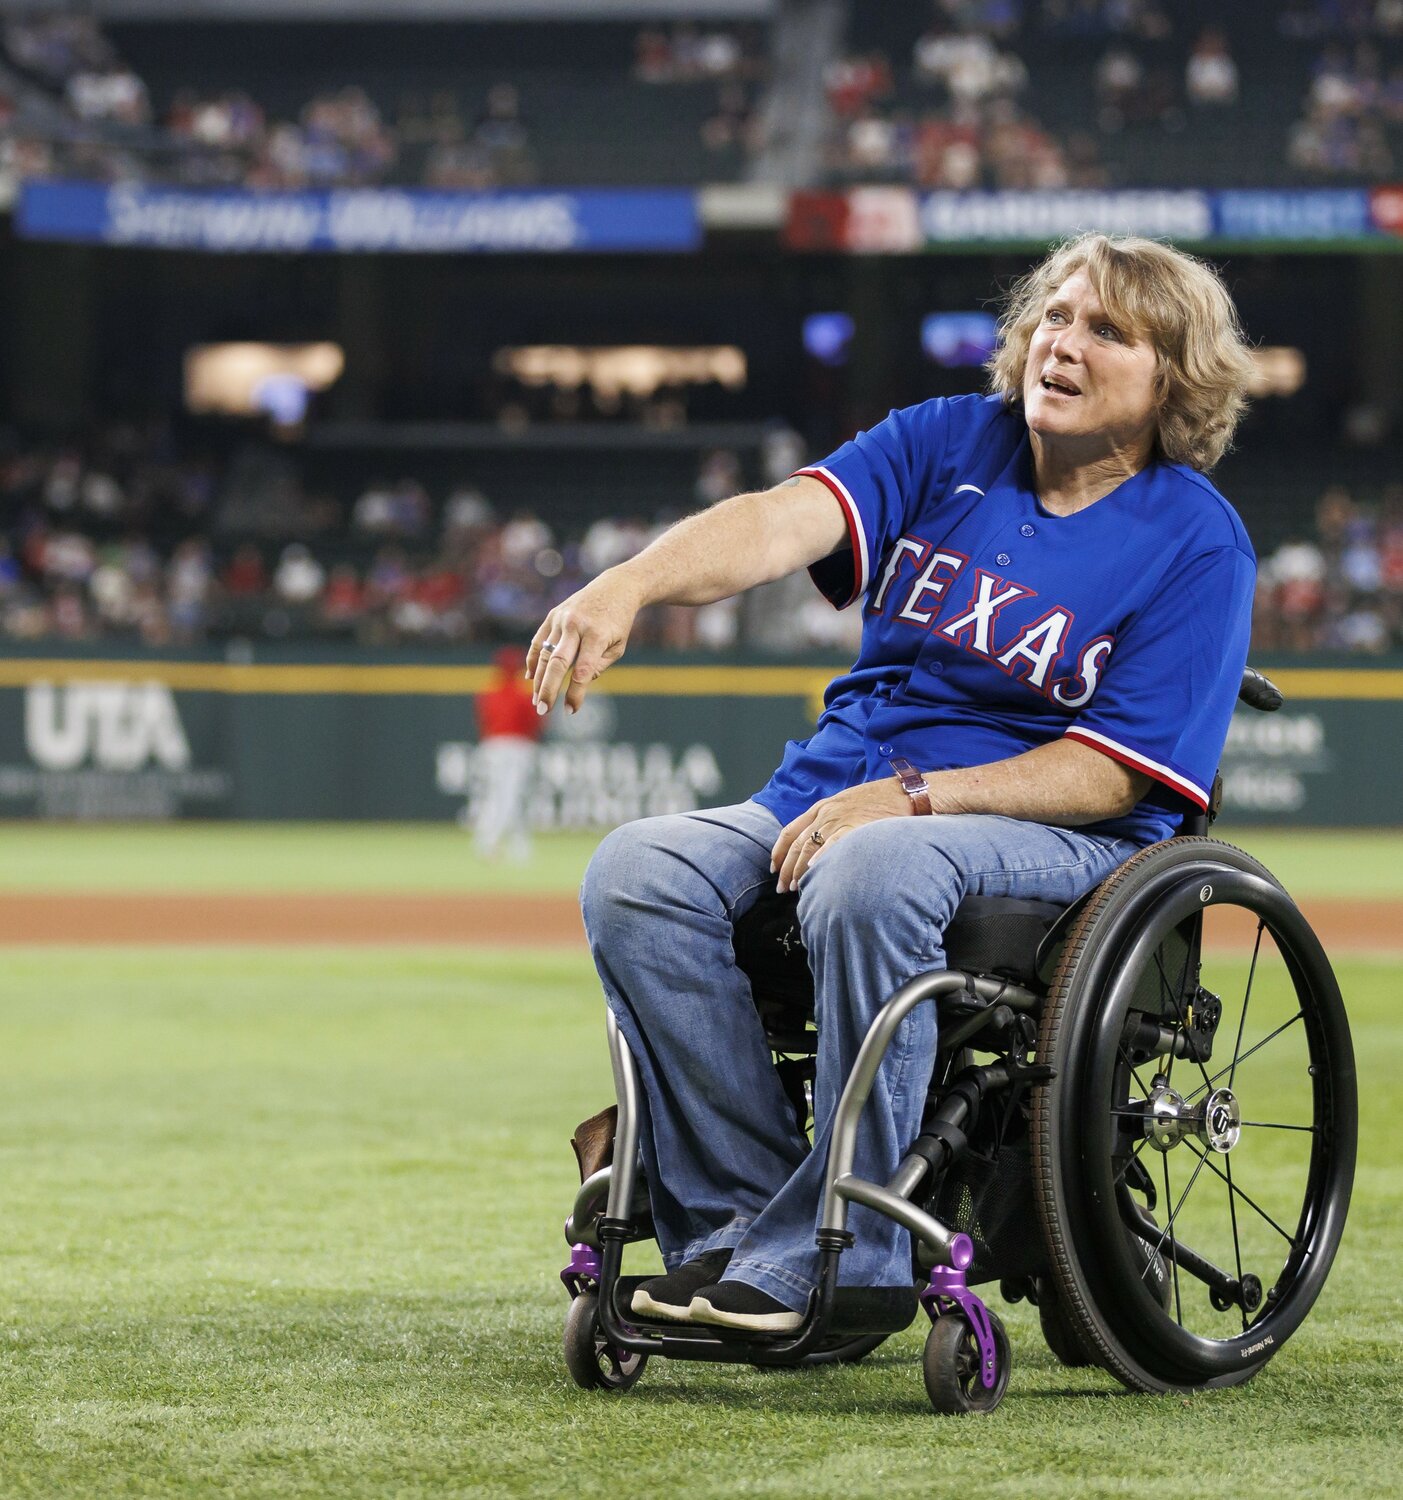 Jeanne fired the first pitch to the plate at the Texas Rangers vs California Angels June 14 evening game.